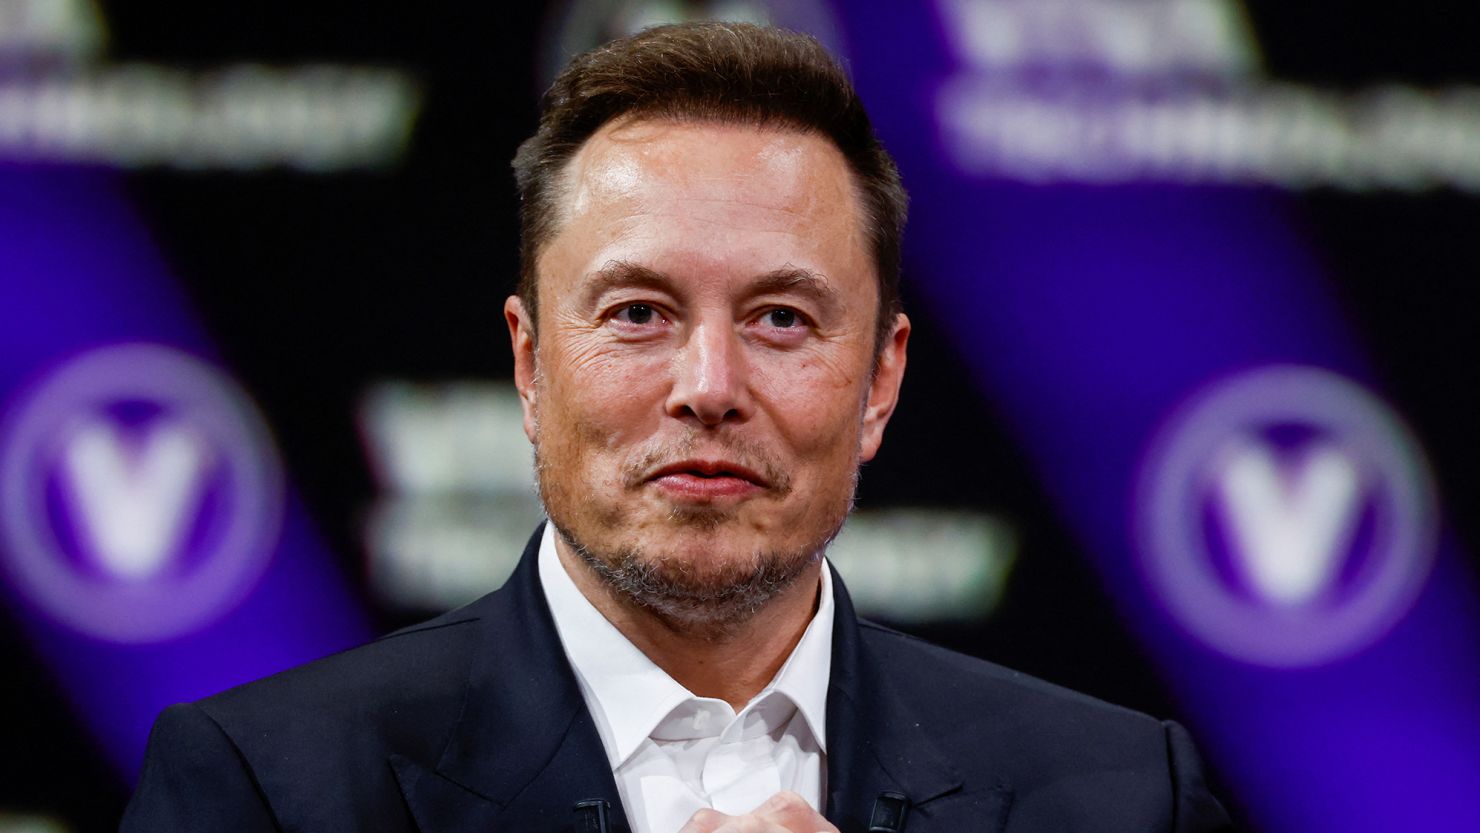 Elon Musk Faces Pressure to Keep Sudan Connected: Why Millions Need Starlink to Stay Online